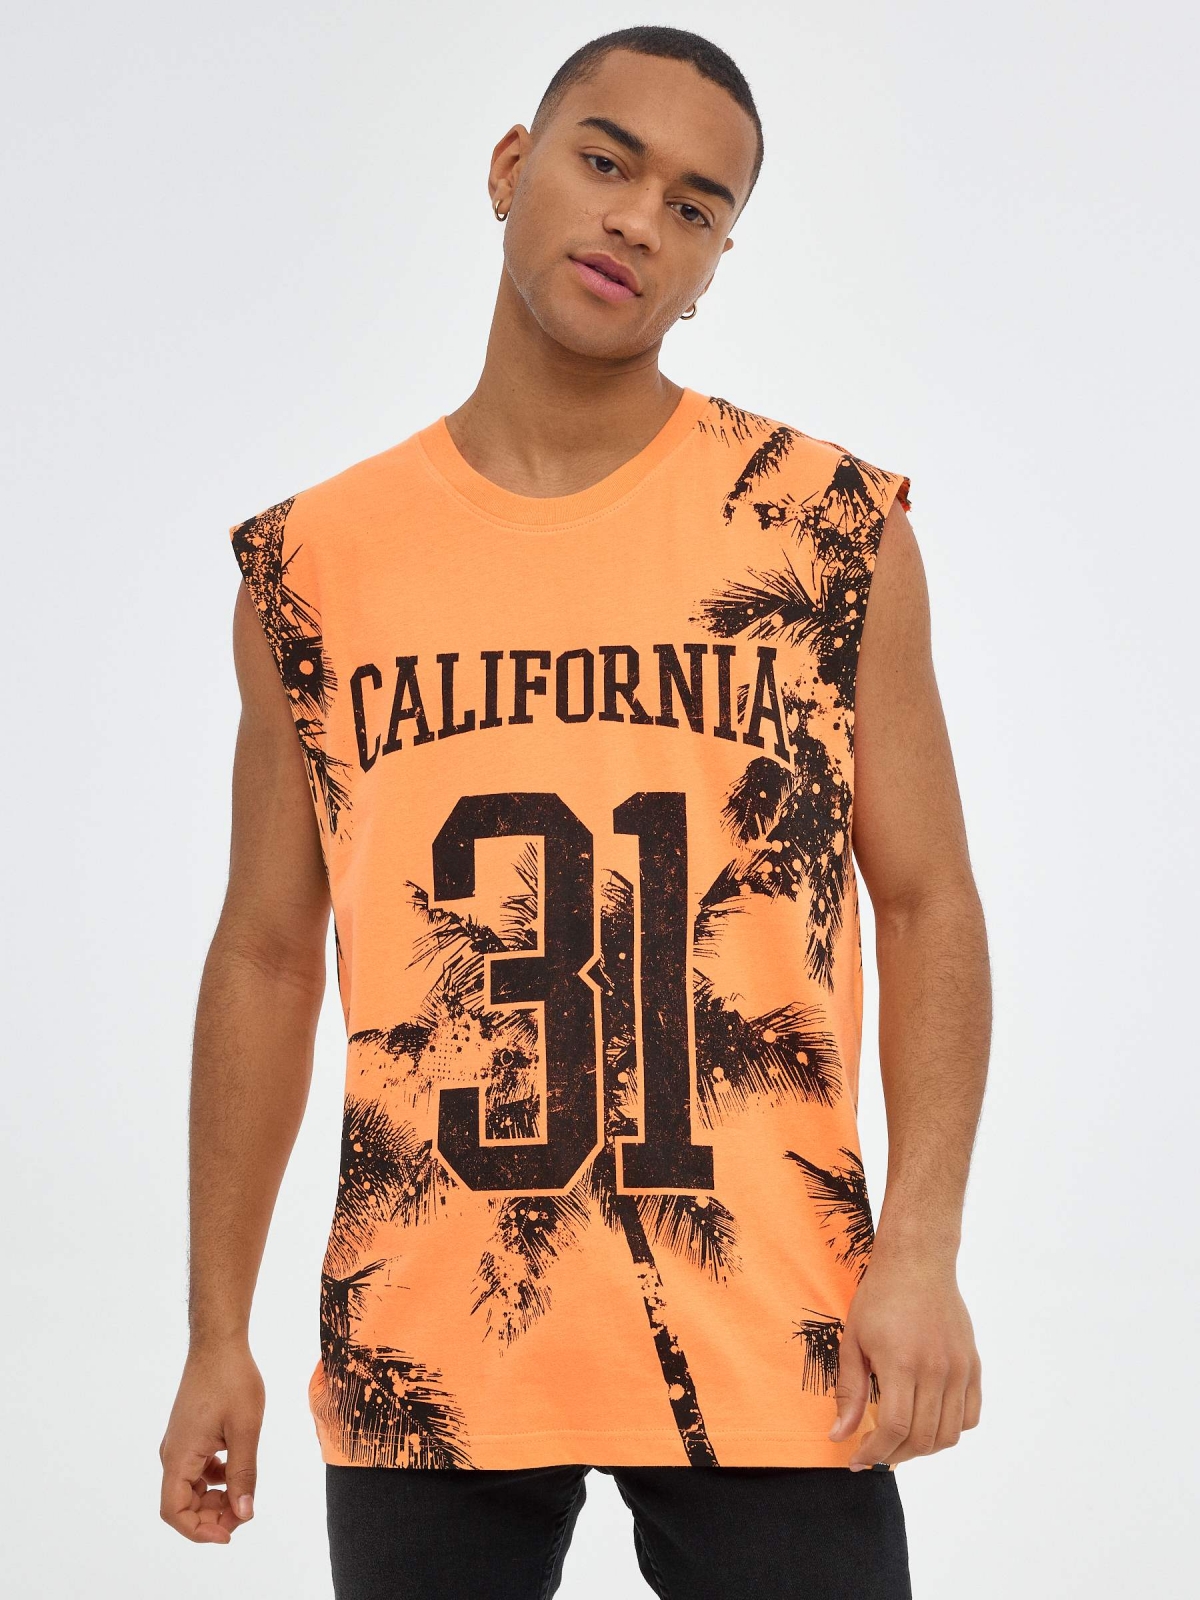 California tank top salmon middle front view